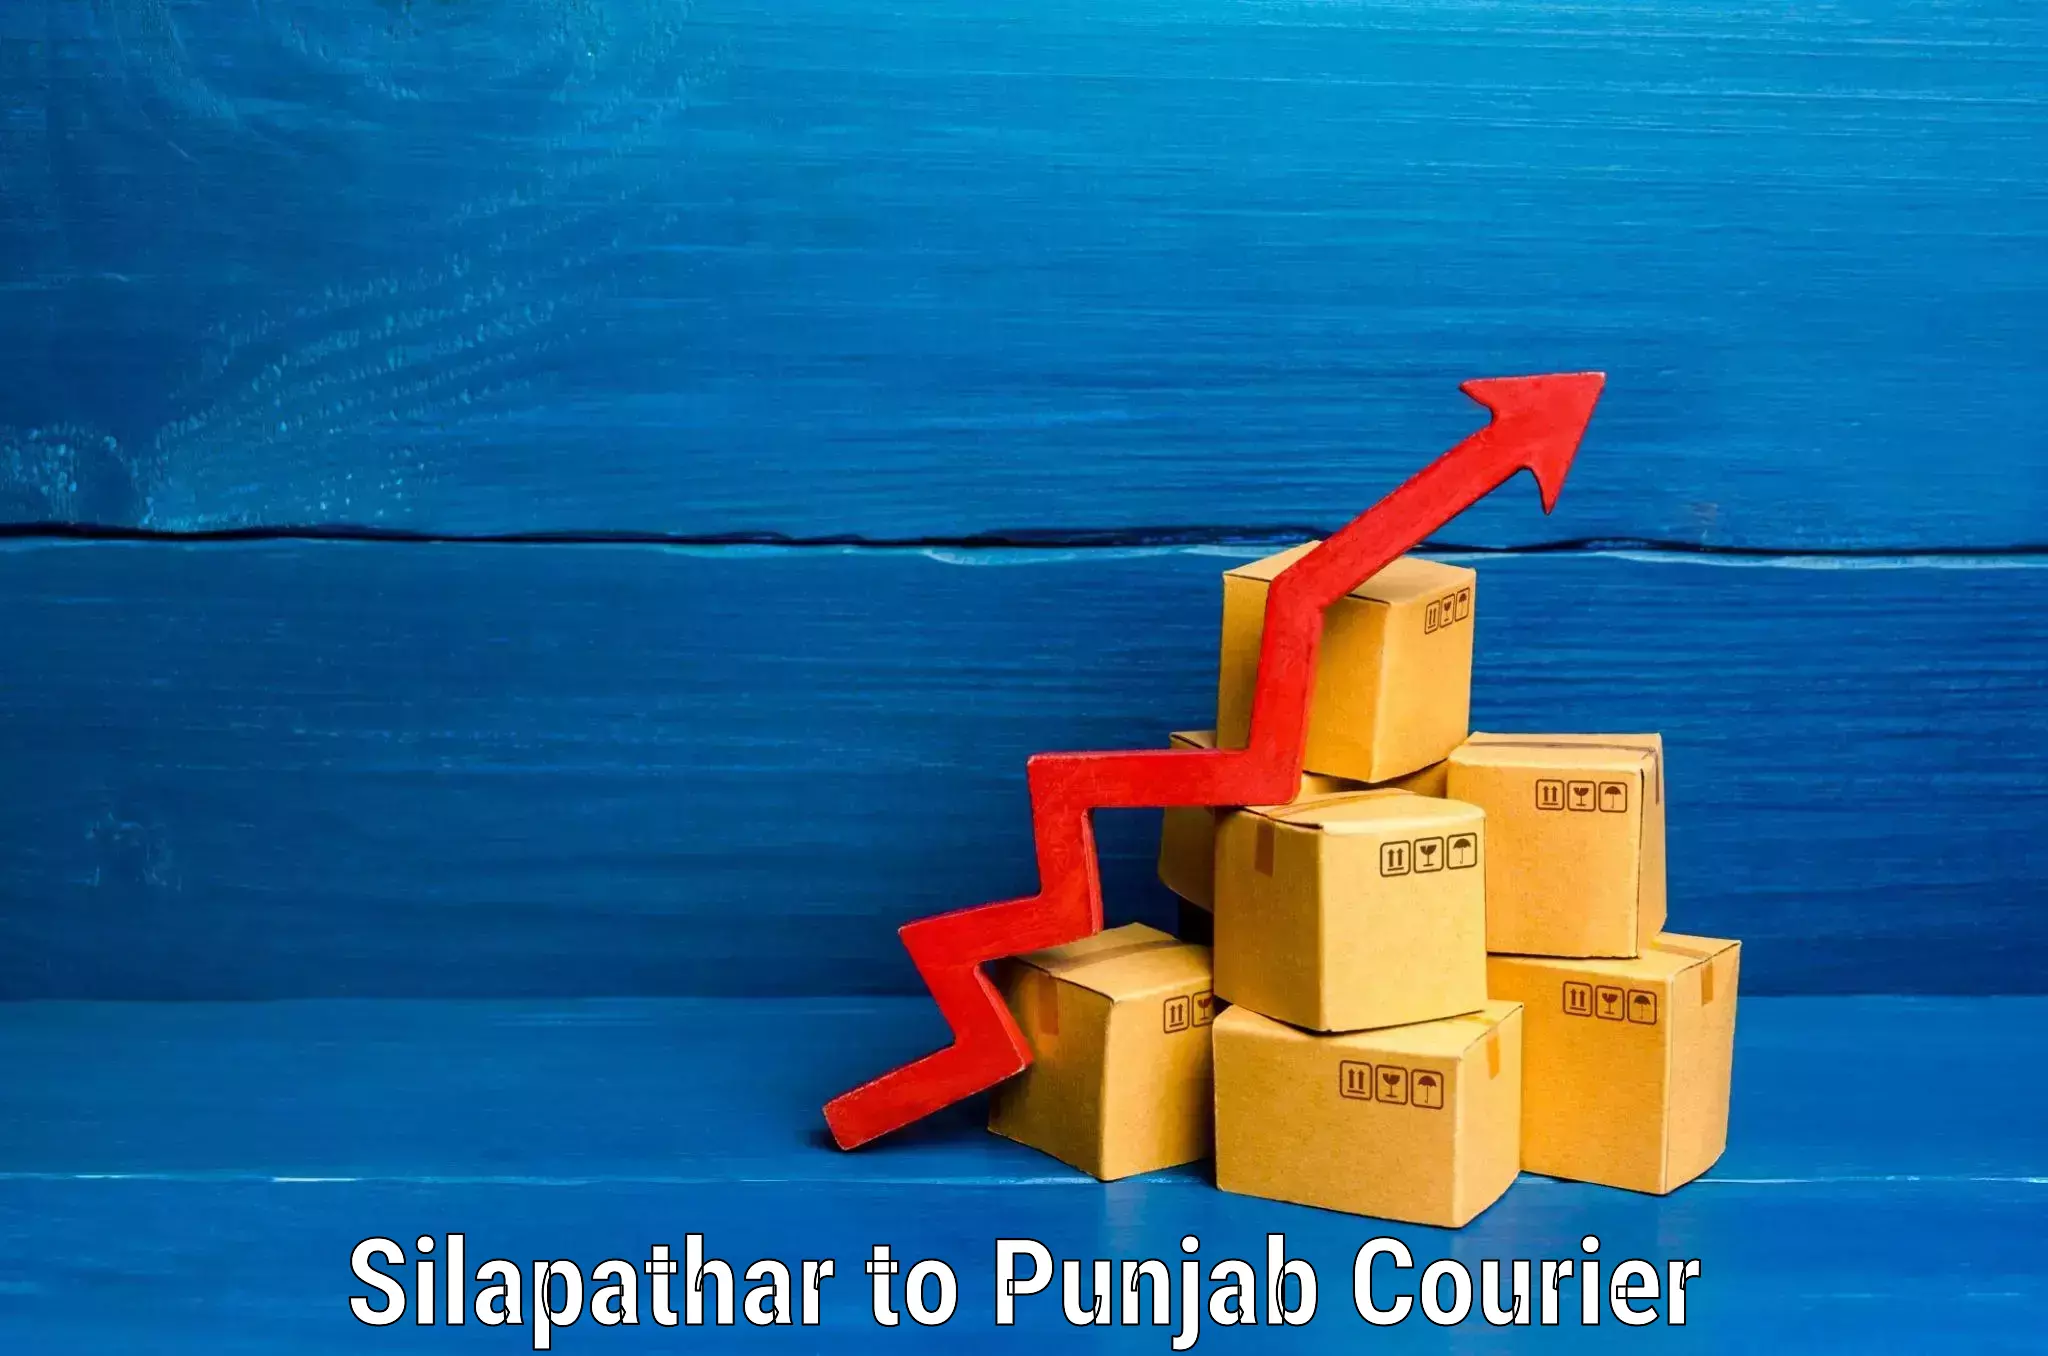 Luggage shipment specialists Silapathar to Punjab